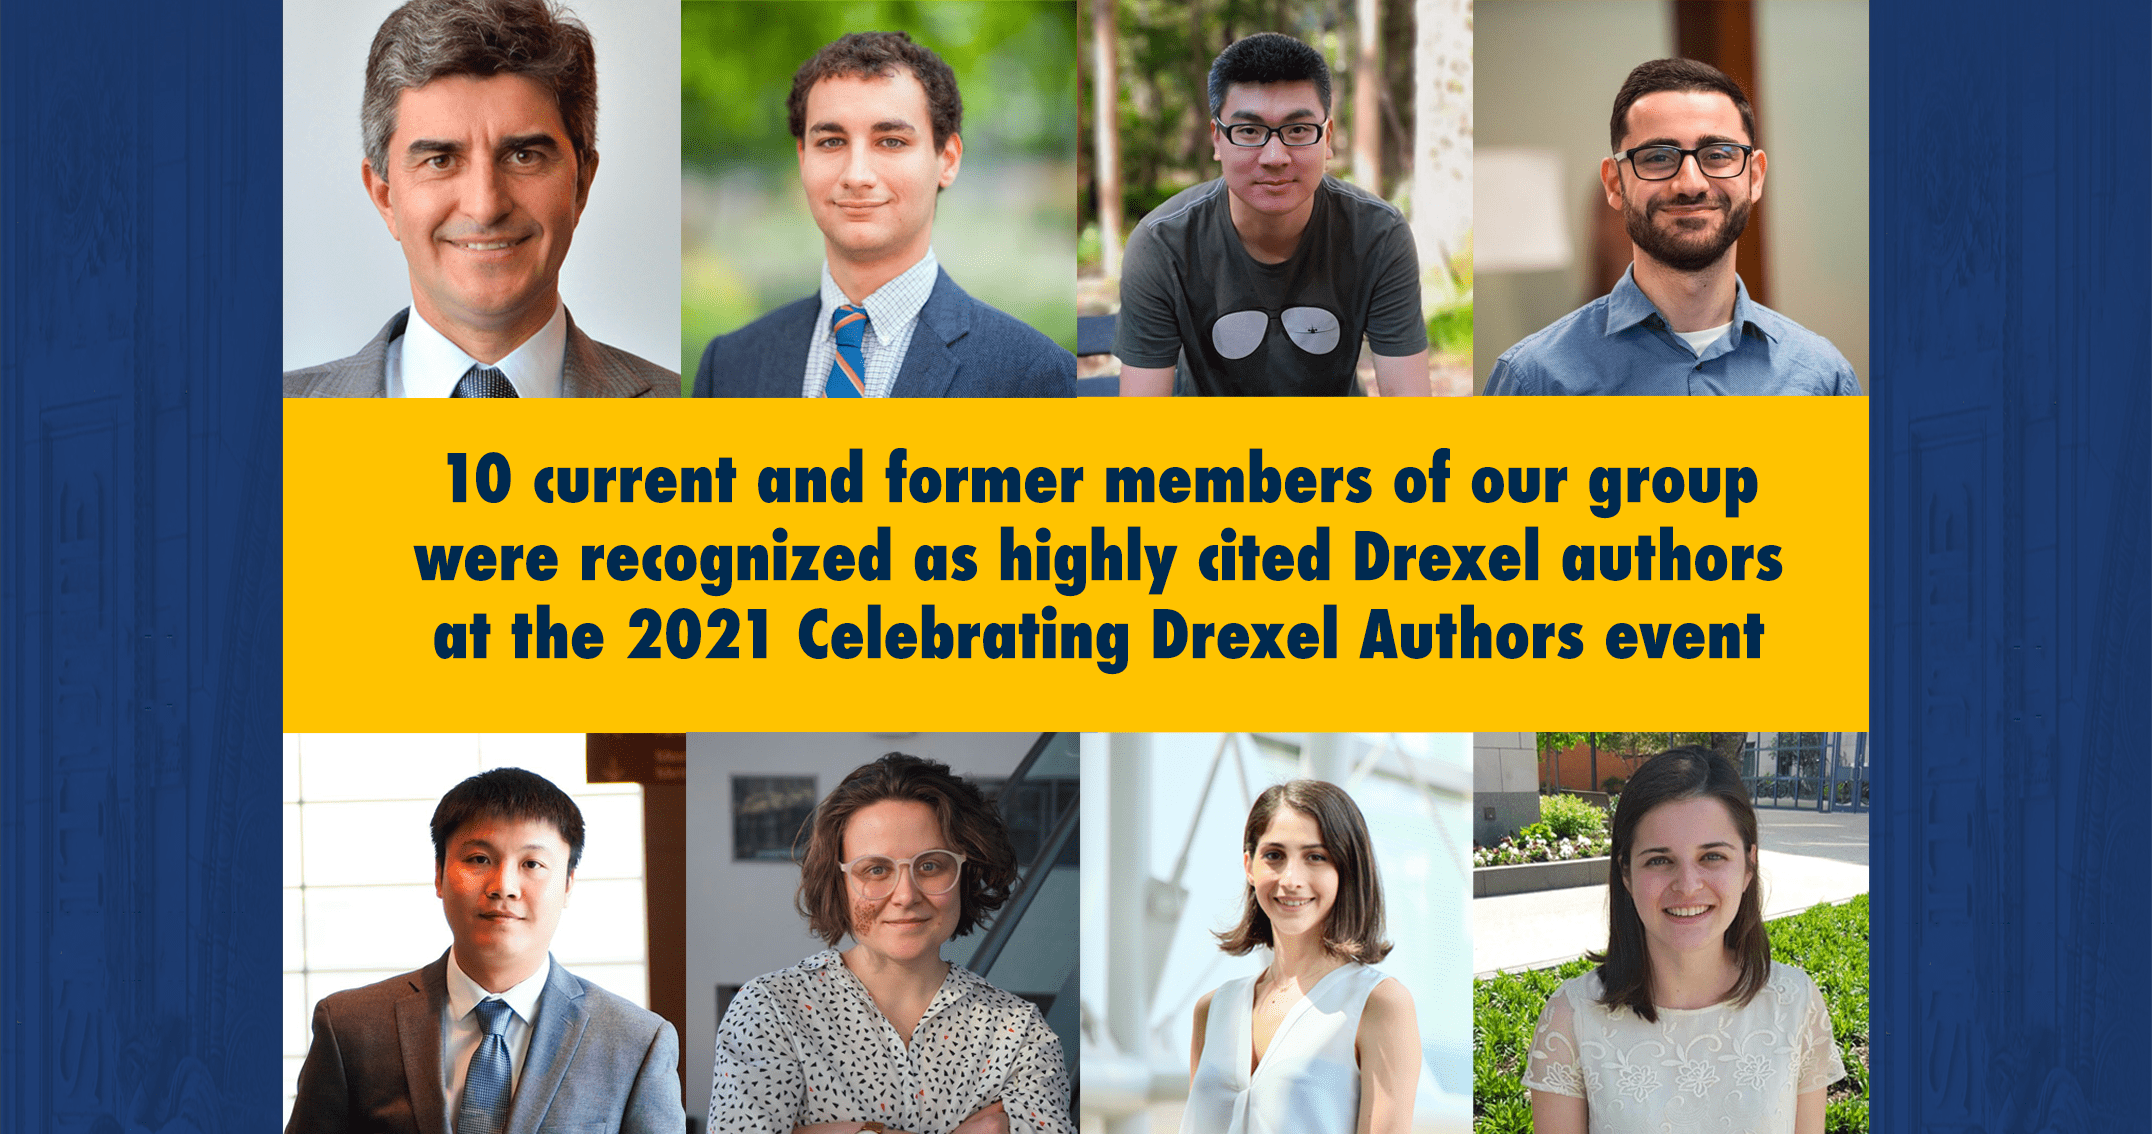 10 Current and Former Members of Our Group Were Recognized as Highly Cited Drexel Authors at the 2021 Celebrating Drexel Author Event